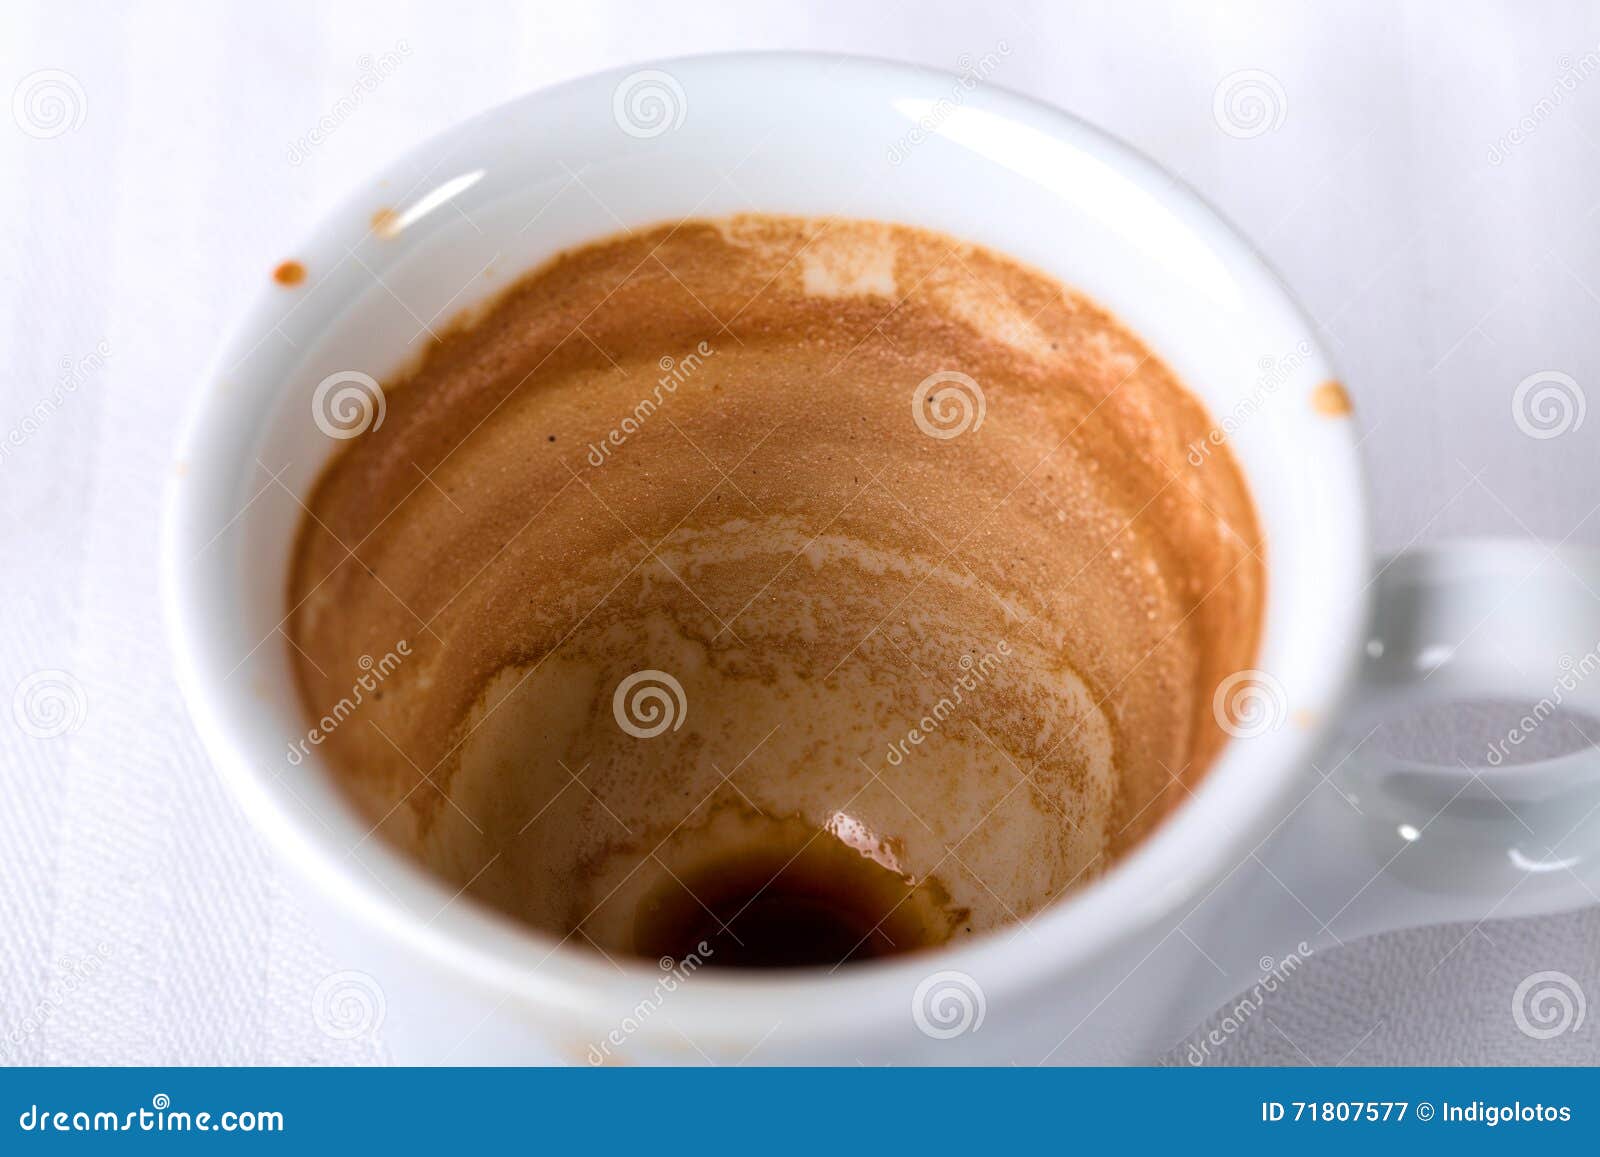 closeup of espresso cup after coffee.